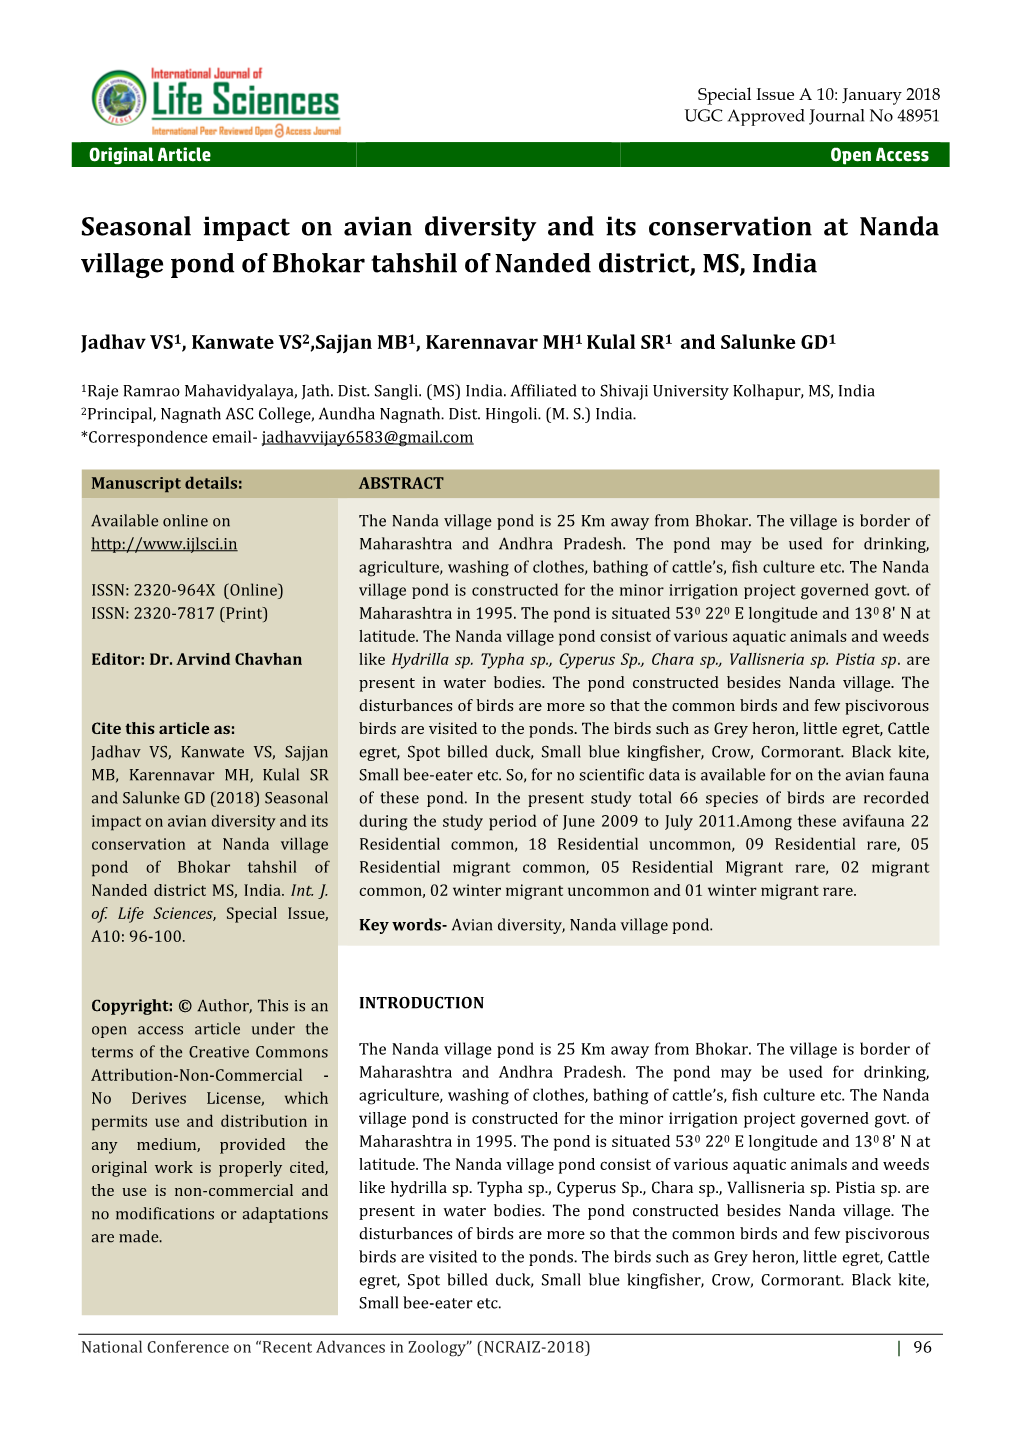 Seasonal Impact on Avian Diversity and Its Conservation at Nanda Village Pond of Bhokar Tahshil of Nanded District, MS, India